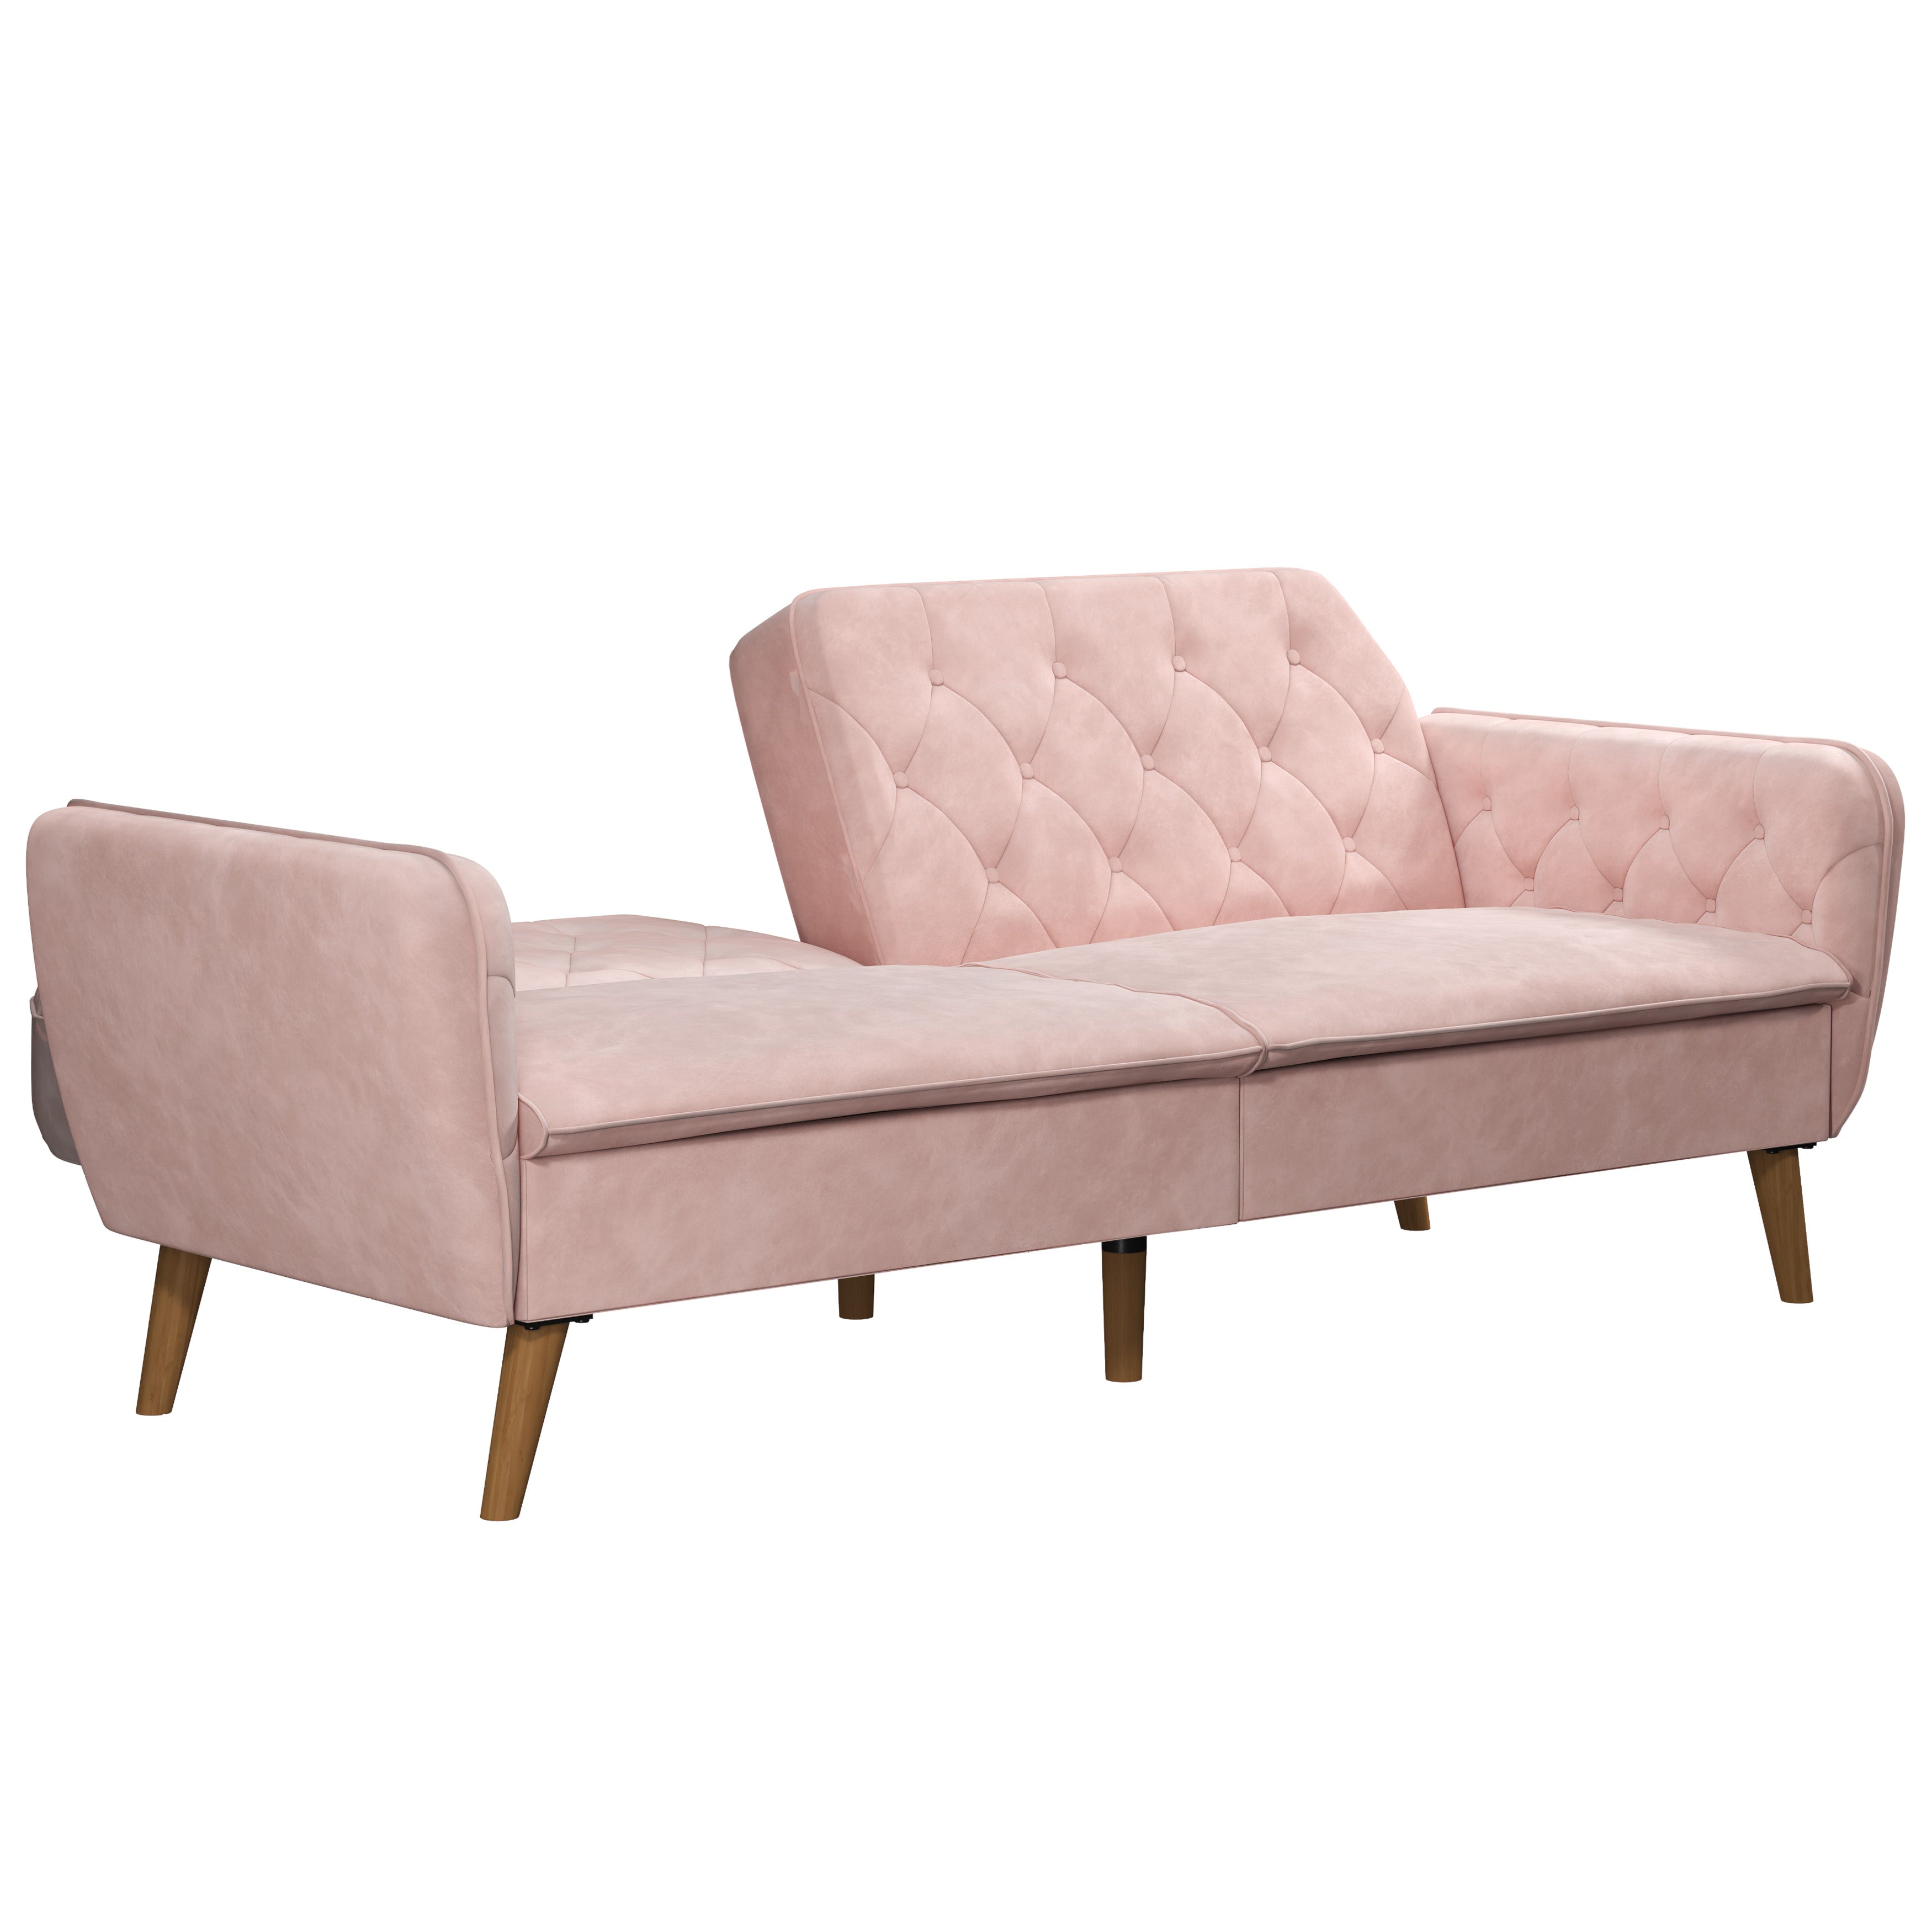 https://www.momjunction.com/wp-content/uploads/product-images/walsunny-convertible-sectional-sofa-couch_afl778.jpg